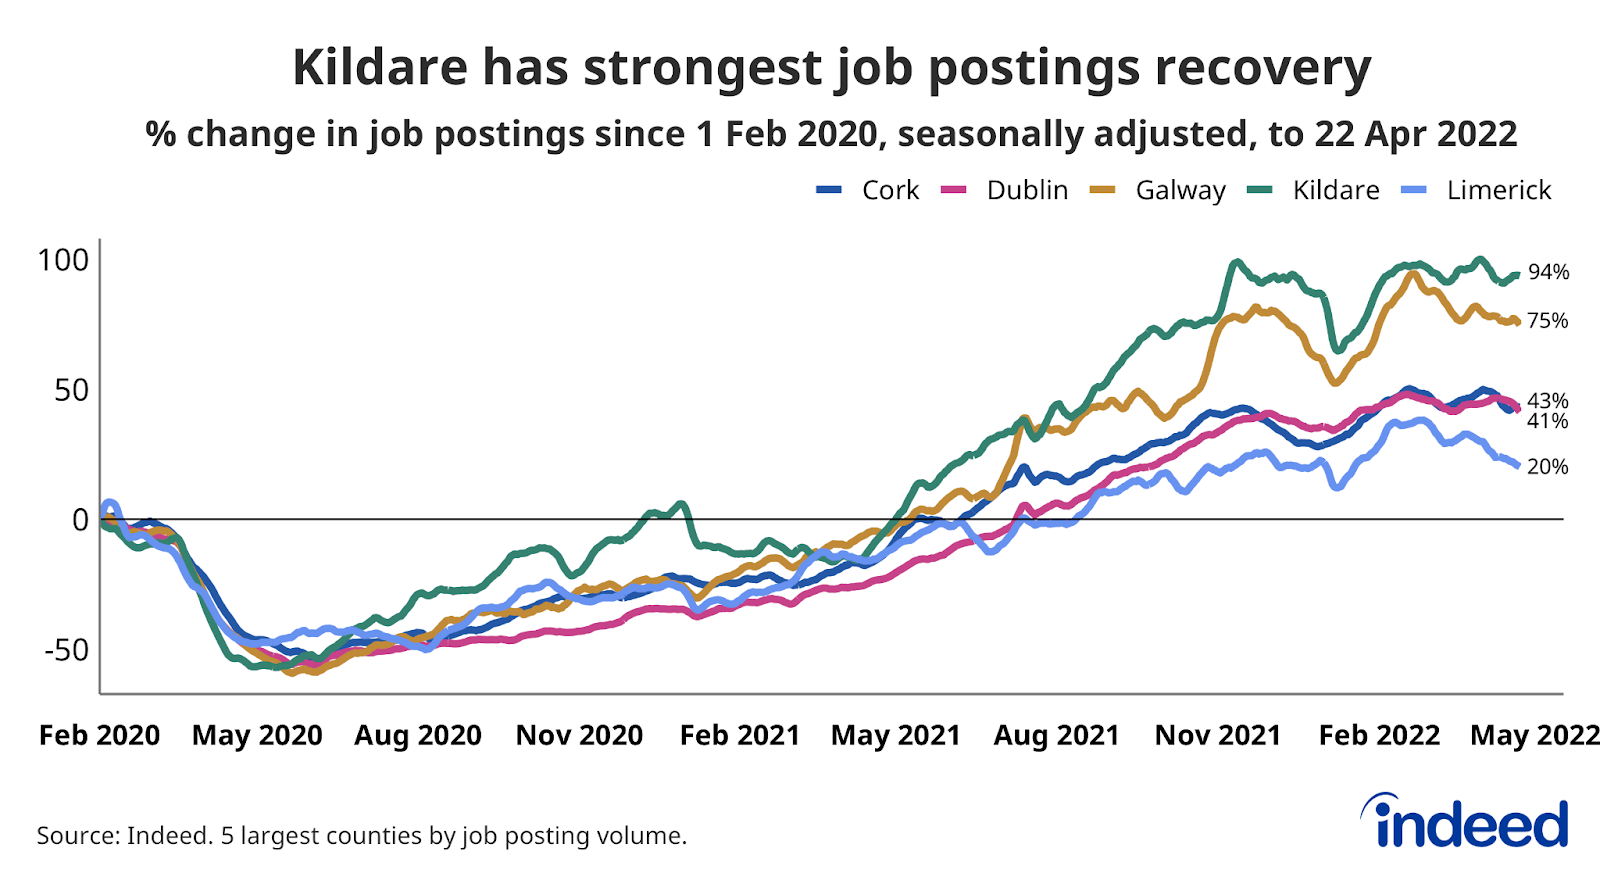 A line graph titled “Kildare has strongest job postings recovery” 